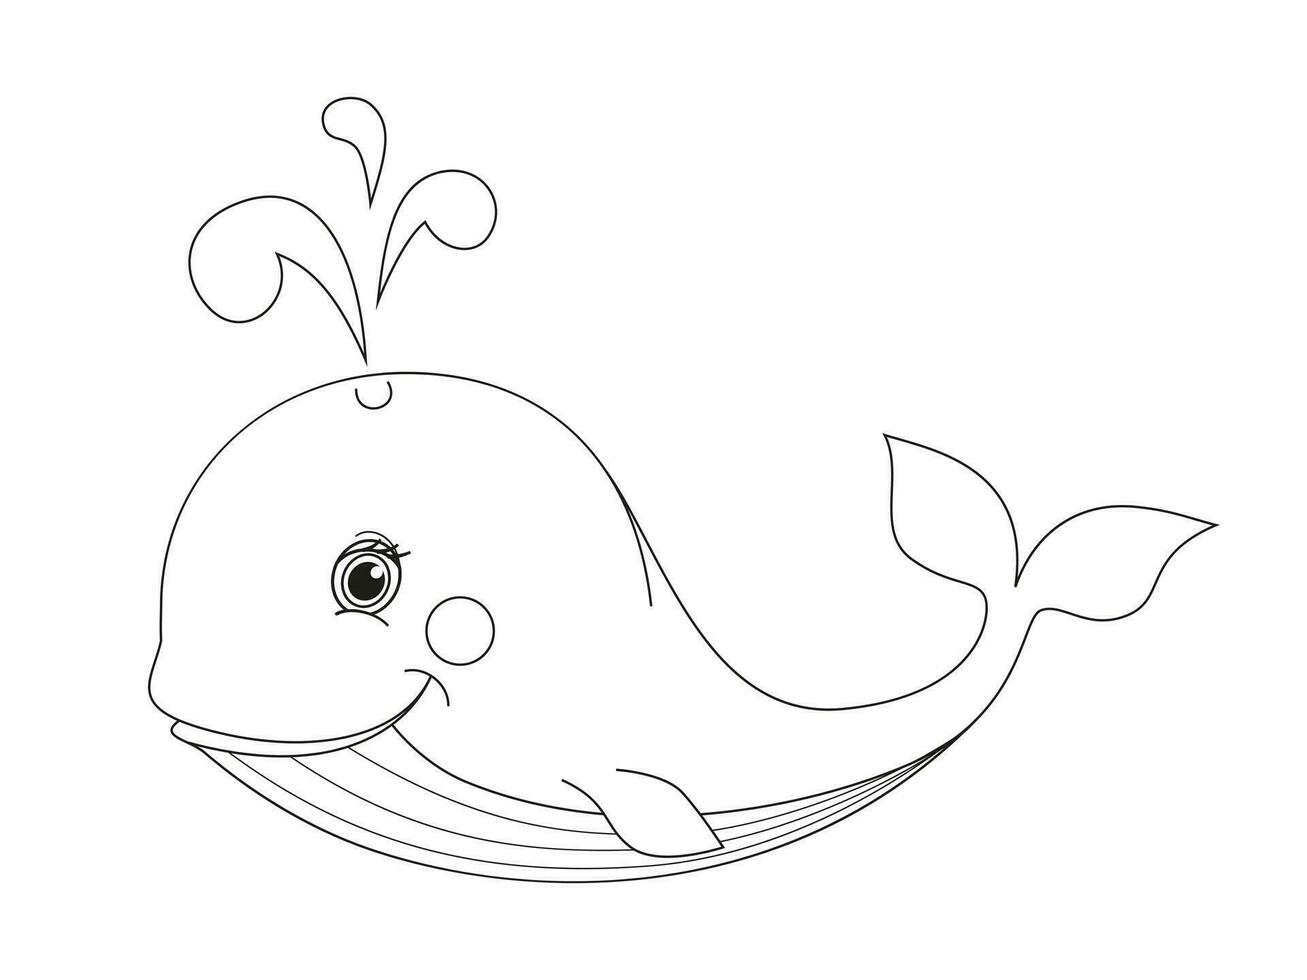 Whale Coloring Page Colored Illustration. Cartoon whale character for children, coloring and scrap book. vector